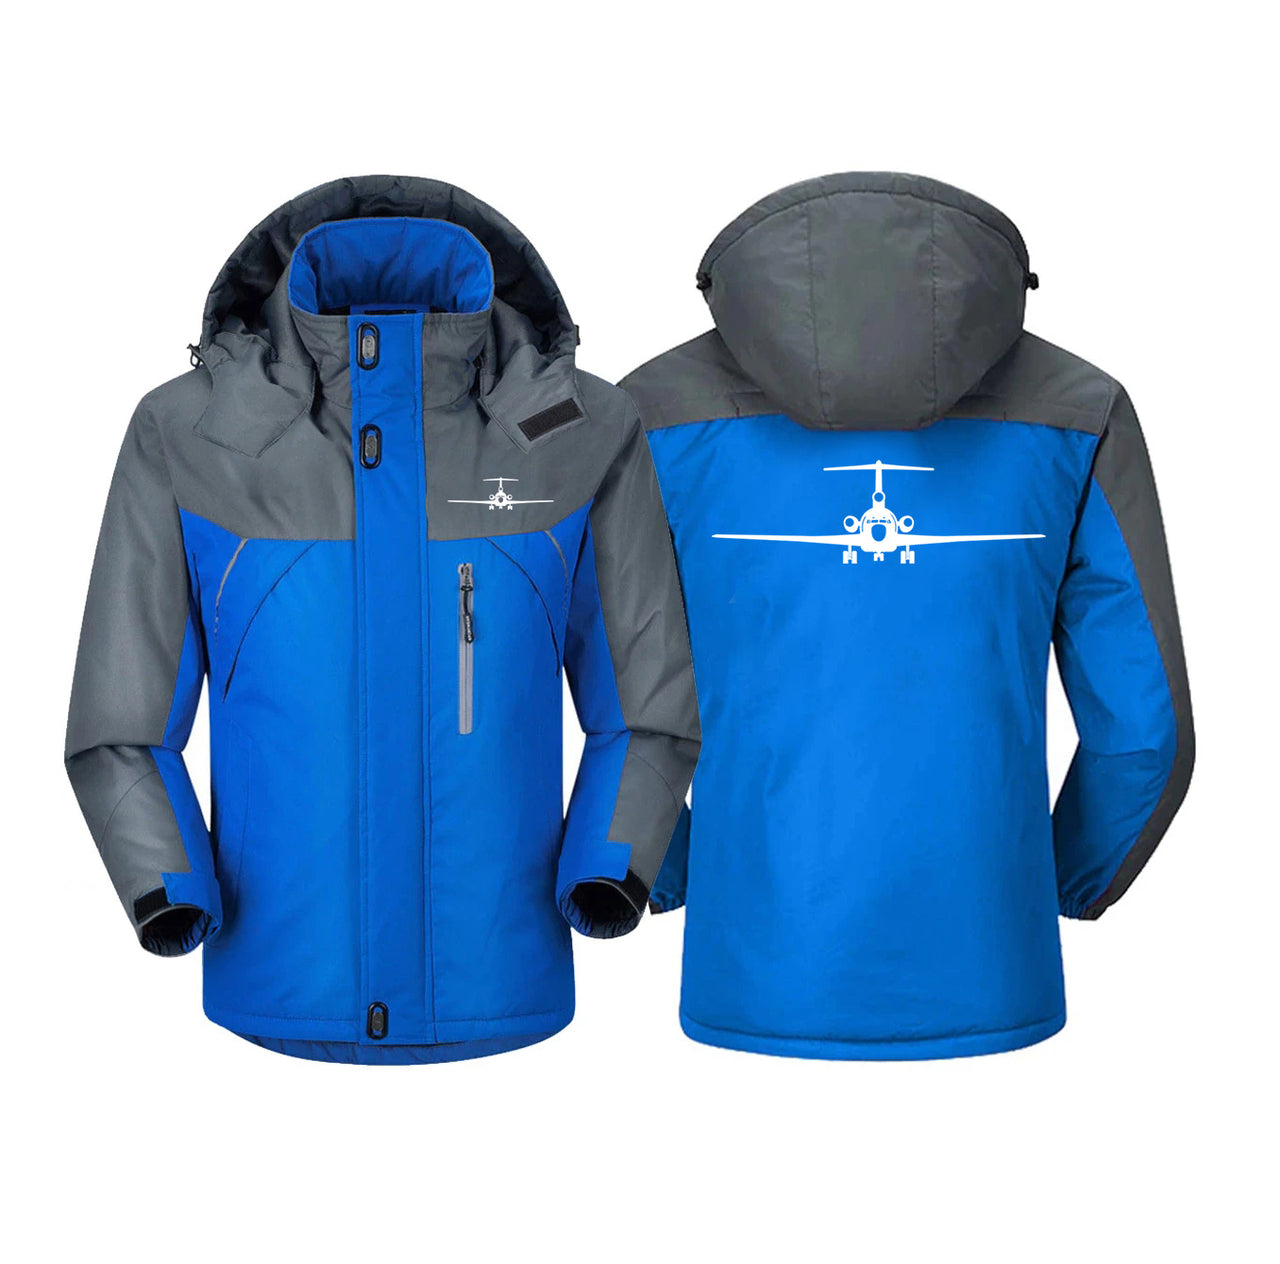 Boeing 727 Silhouette Designed Thick Winter Jackets